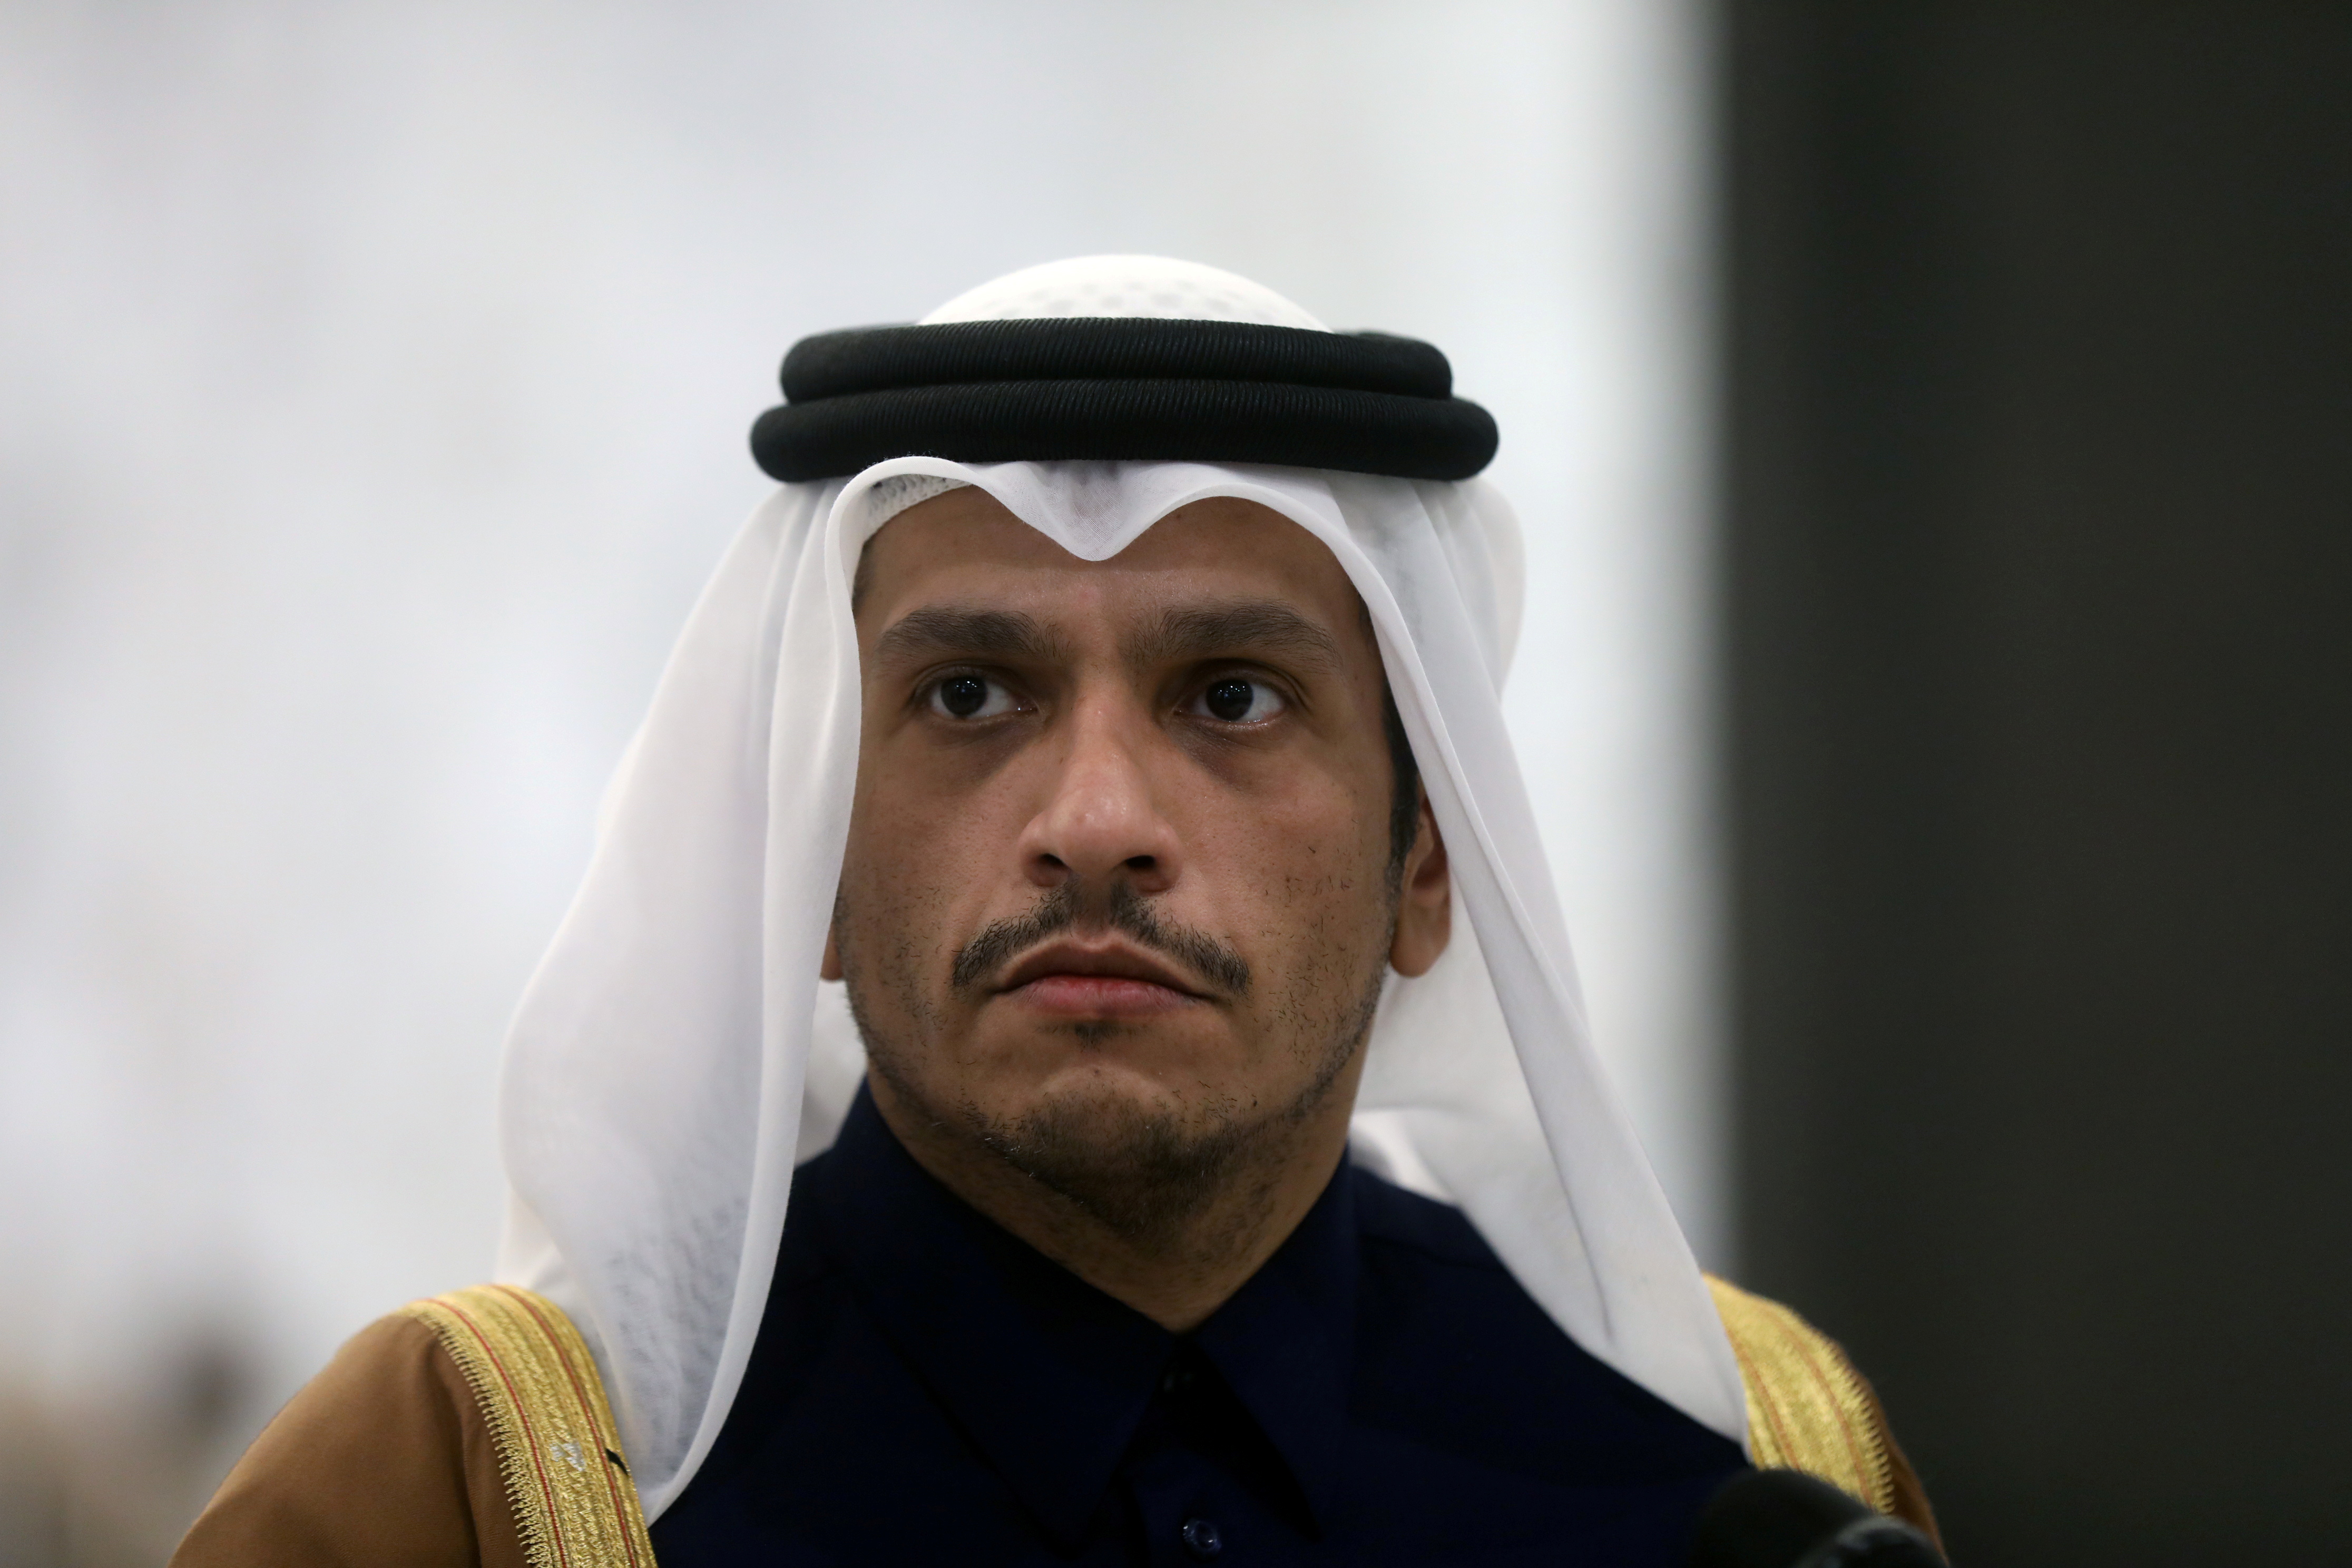 Qatari foreign minister Sheikh Mohammed bin Abdulrahman Al-Thani, is pictured at the presidential palace in Baabda, Lebanon February 9, 2021. REUTERS/Mohamed Azakir/File Photo